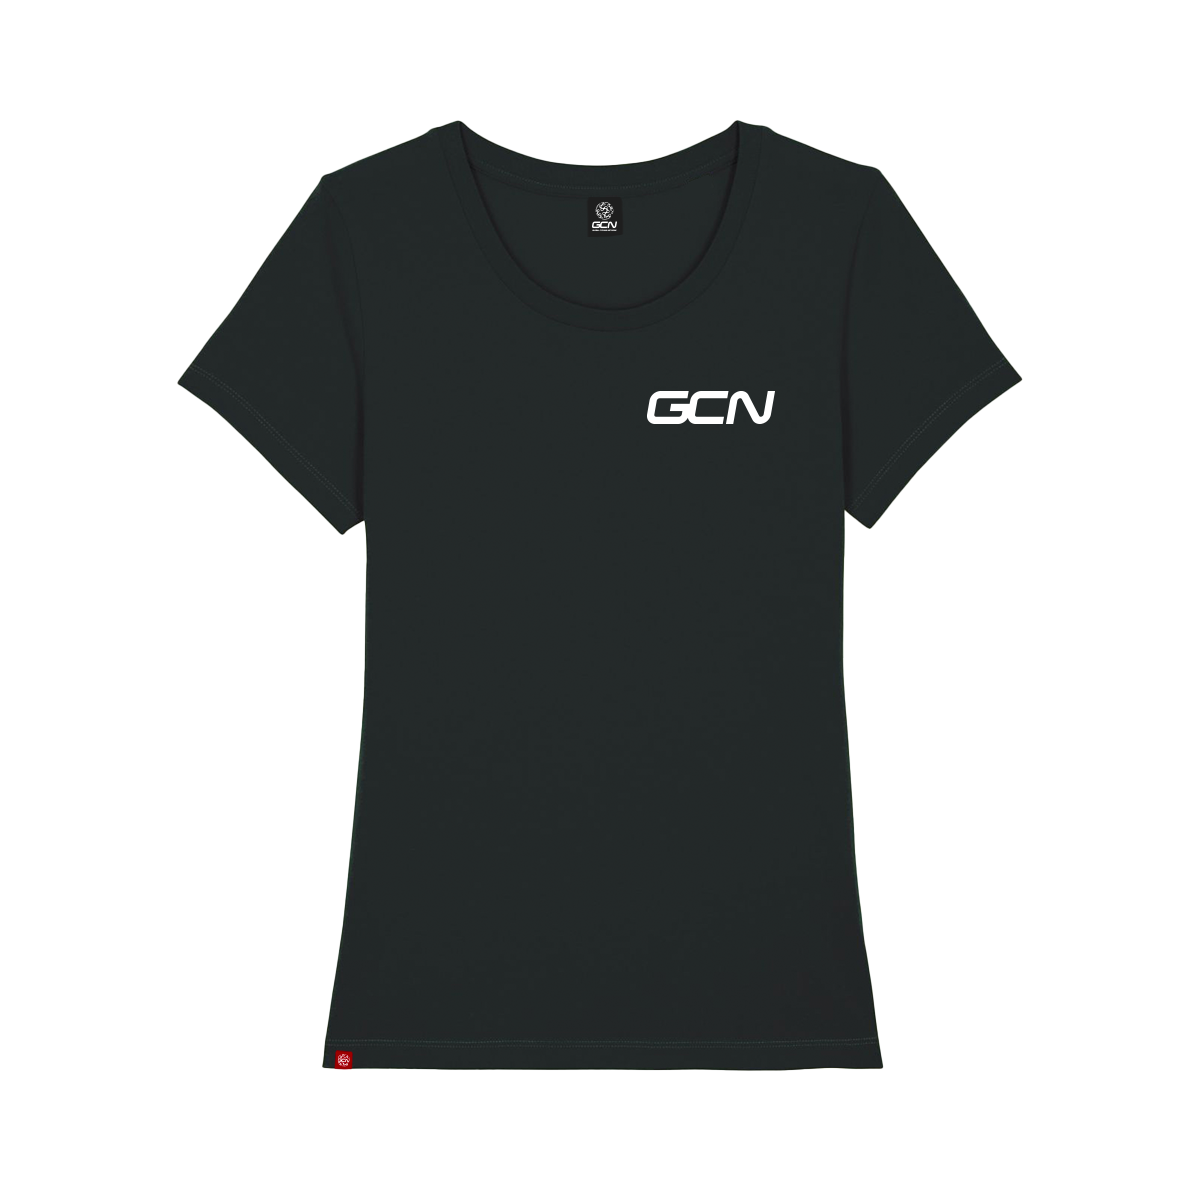 GCN Women's Core Black T-Shirt - Women's Black T-Shirt, with a small white screen printed GCN logo in the top left.